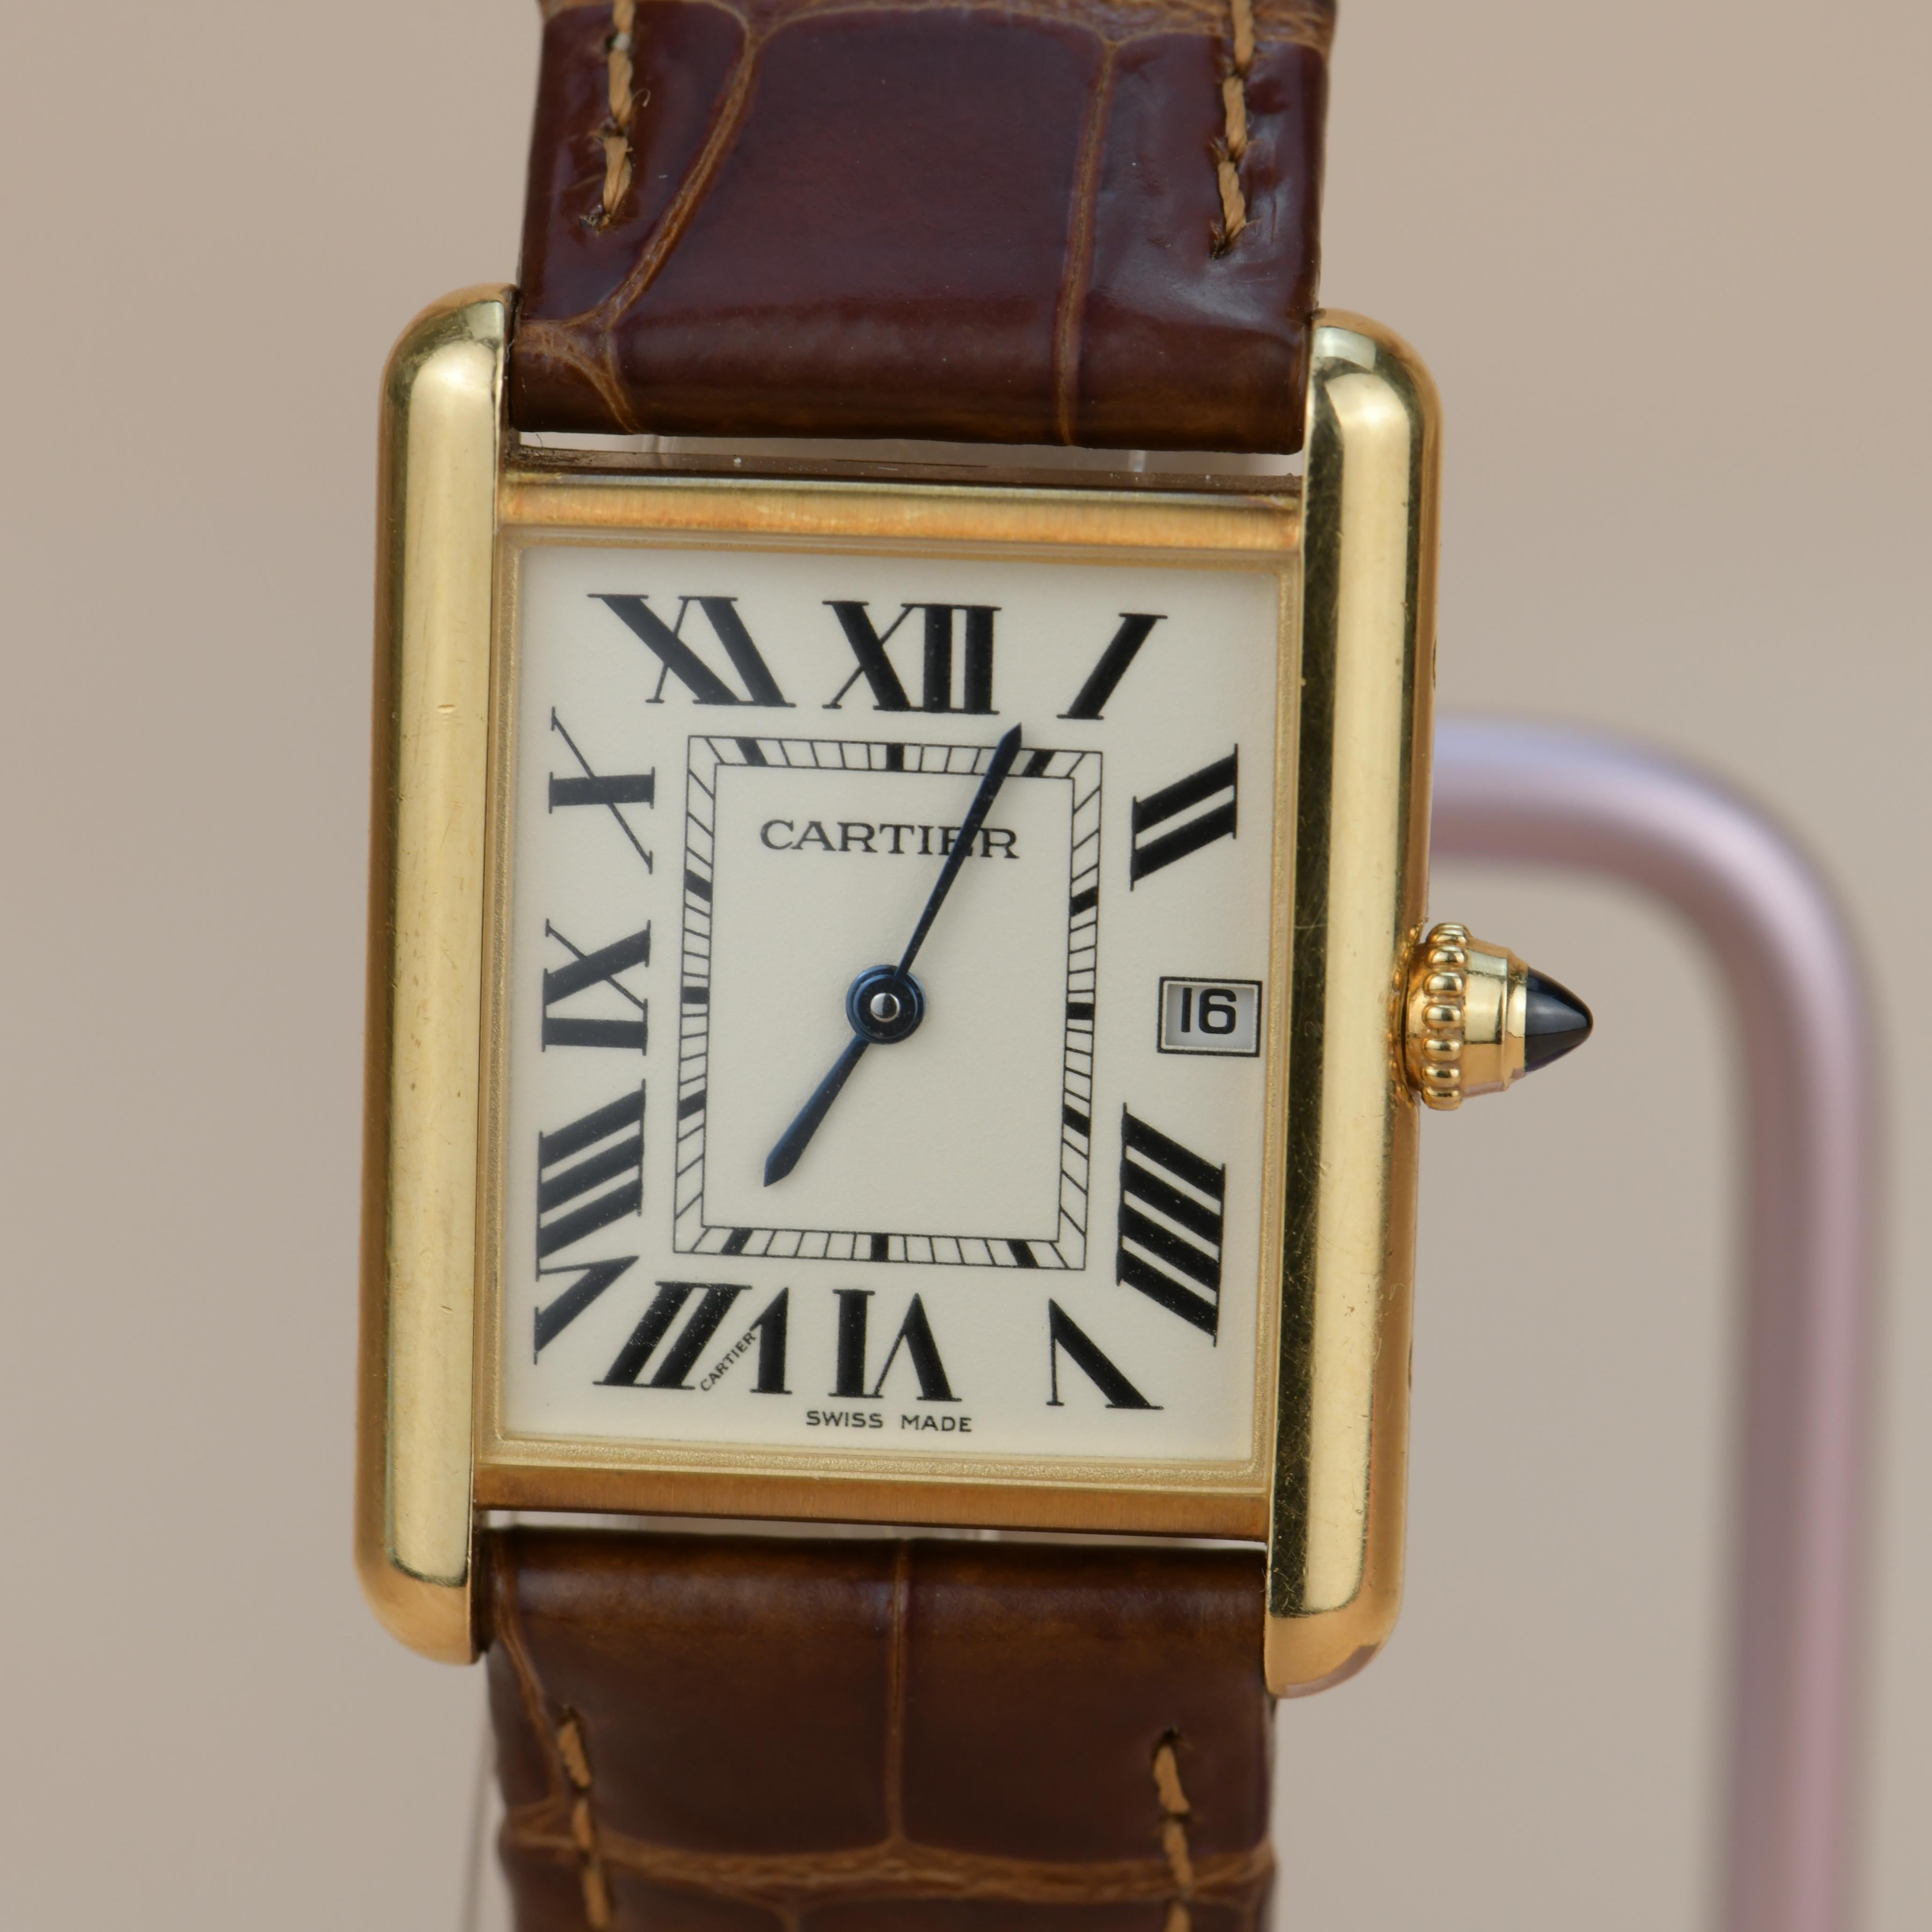 Dandelion Antiques Code	  AT-0862
Brand	                                  Cartier
Model No.	                          W1529756
Retail Price                                £9,000 / $12500
____________________________________

Date	                   